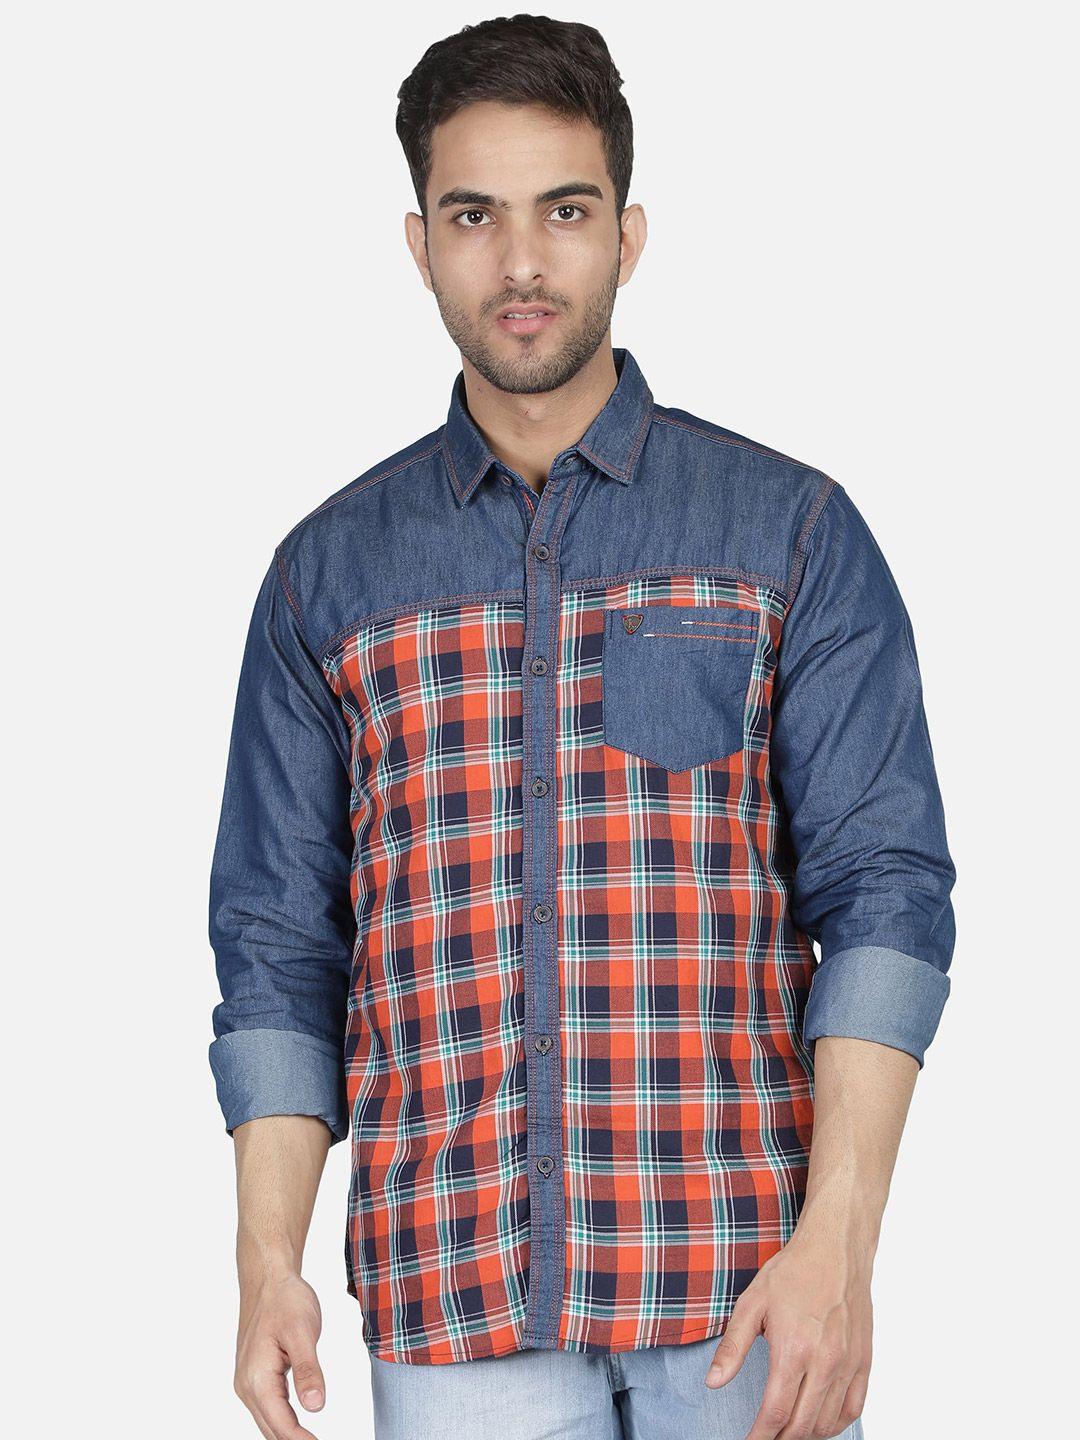 kuons-avenue-men-smart-slim-fit-checked-casual-shirt